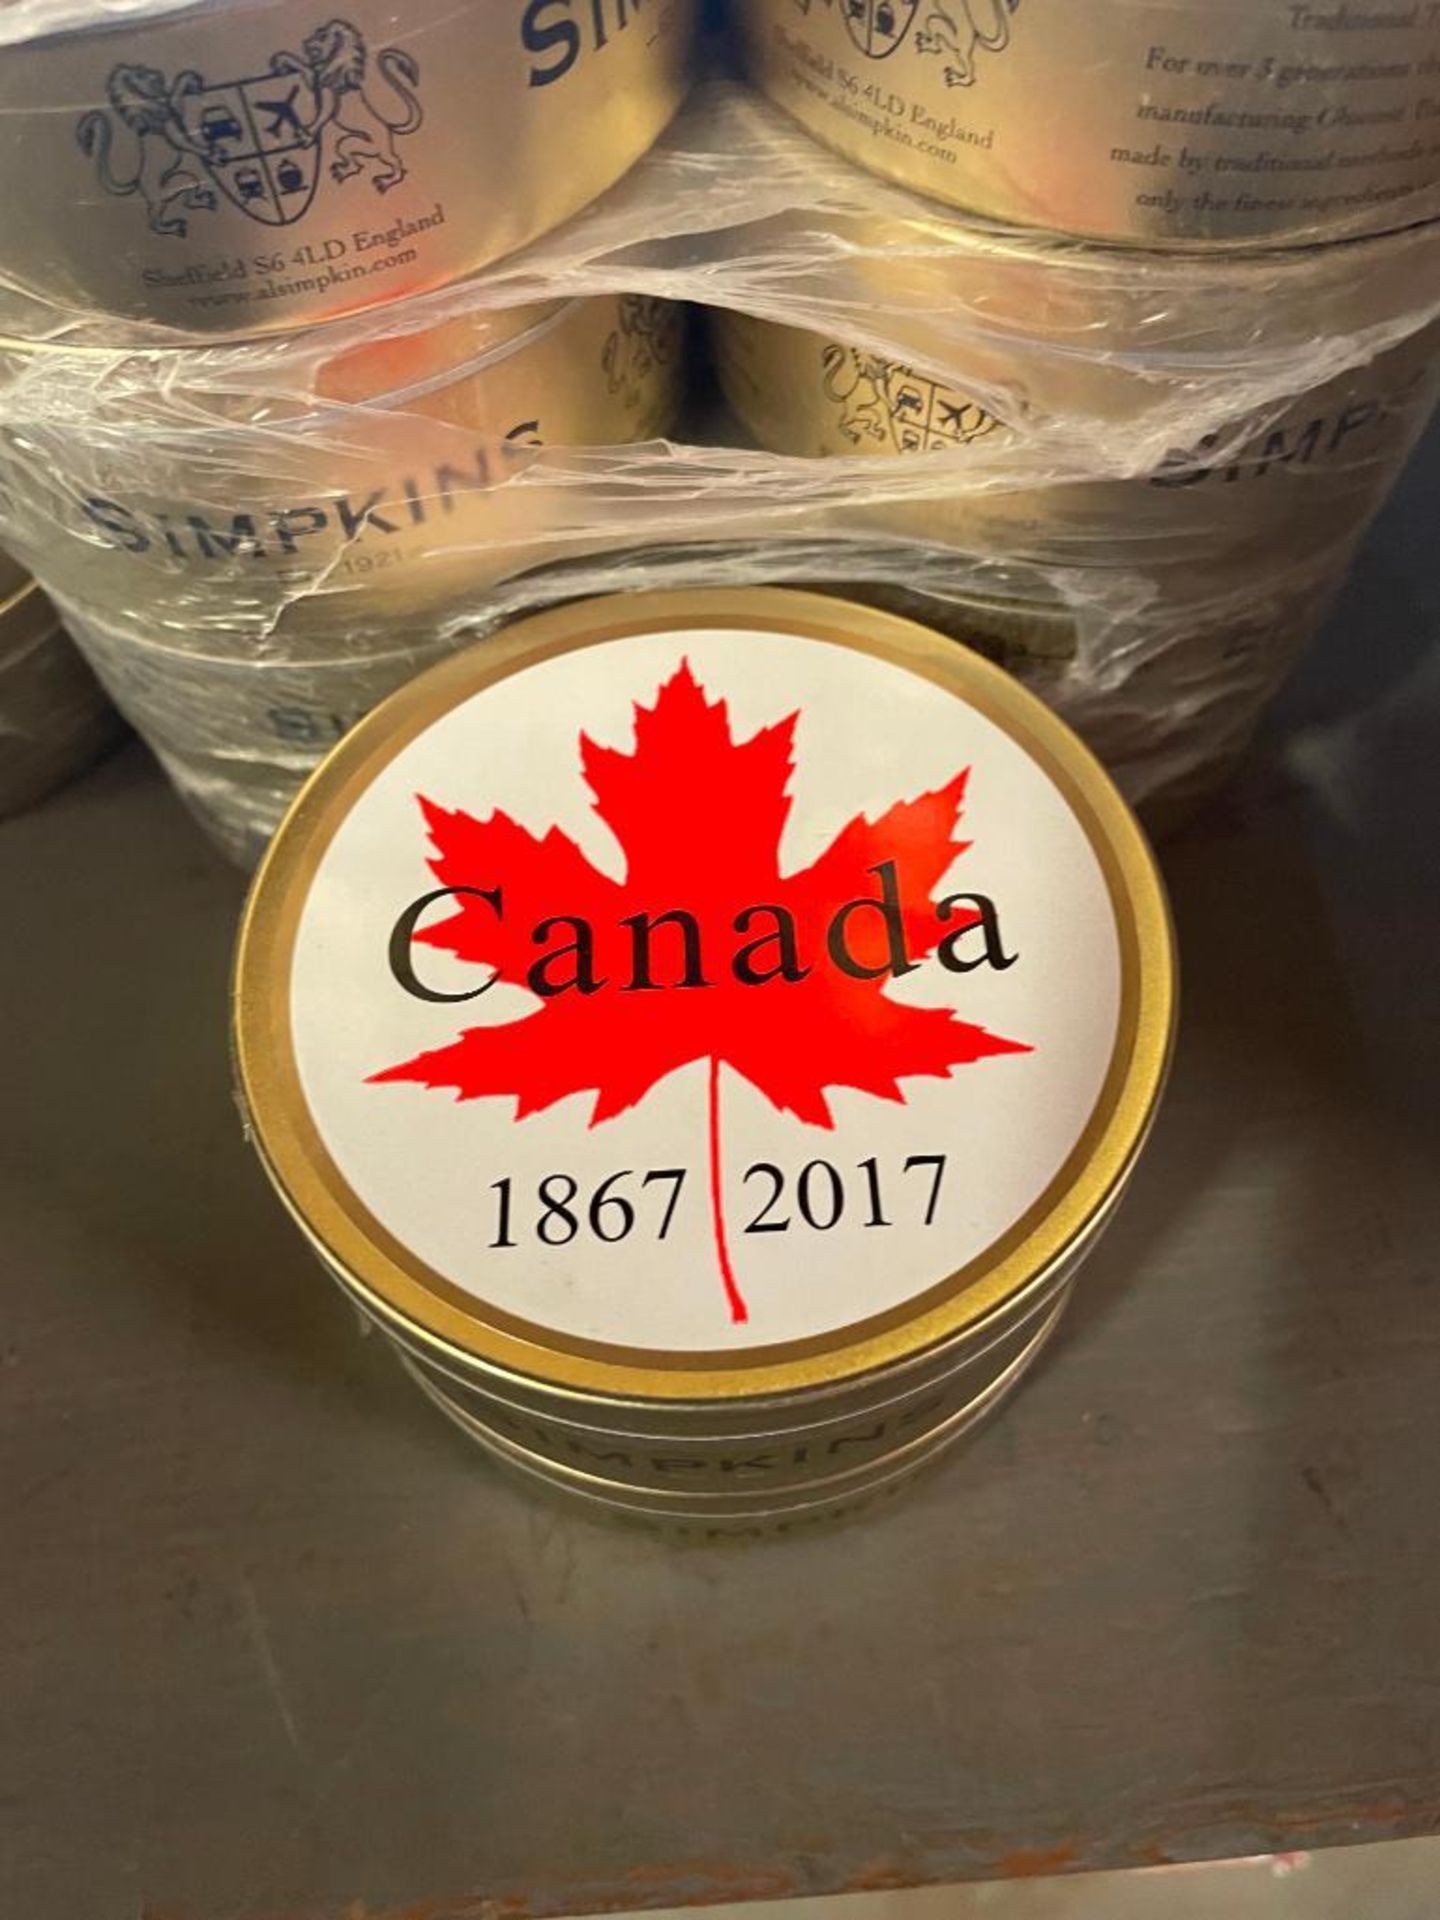 (42) TINS OF SIMPKINS TRAVEL SWEETS, CANADA 150 YEARS DROPS, 200G/TIN - Image 2 of 4